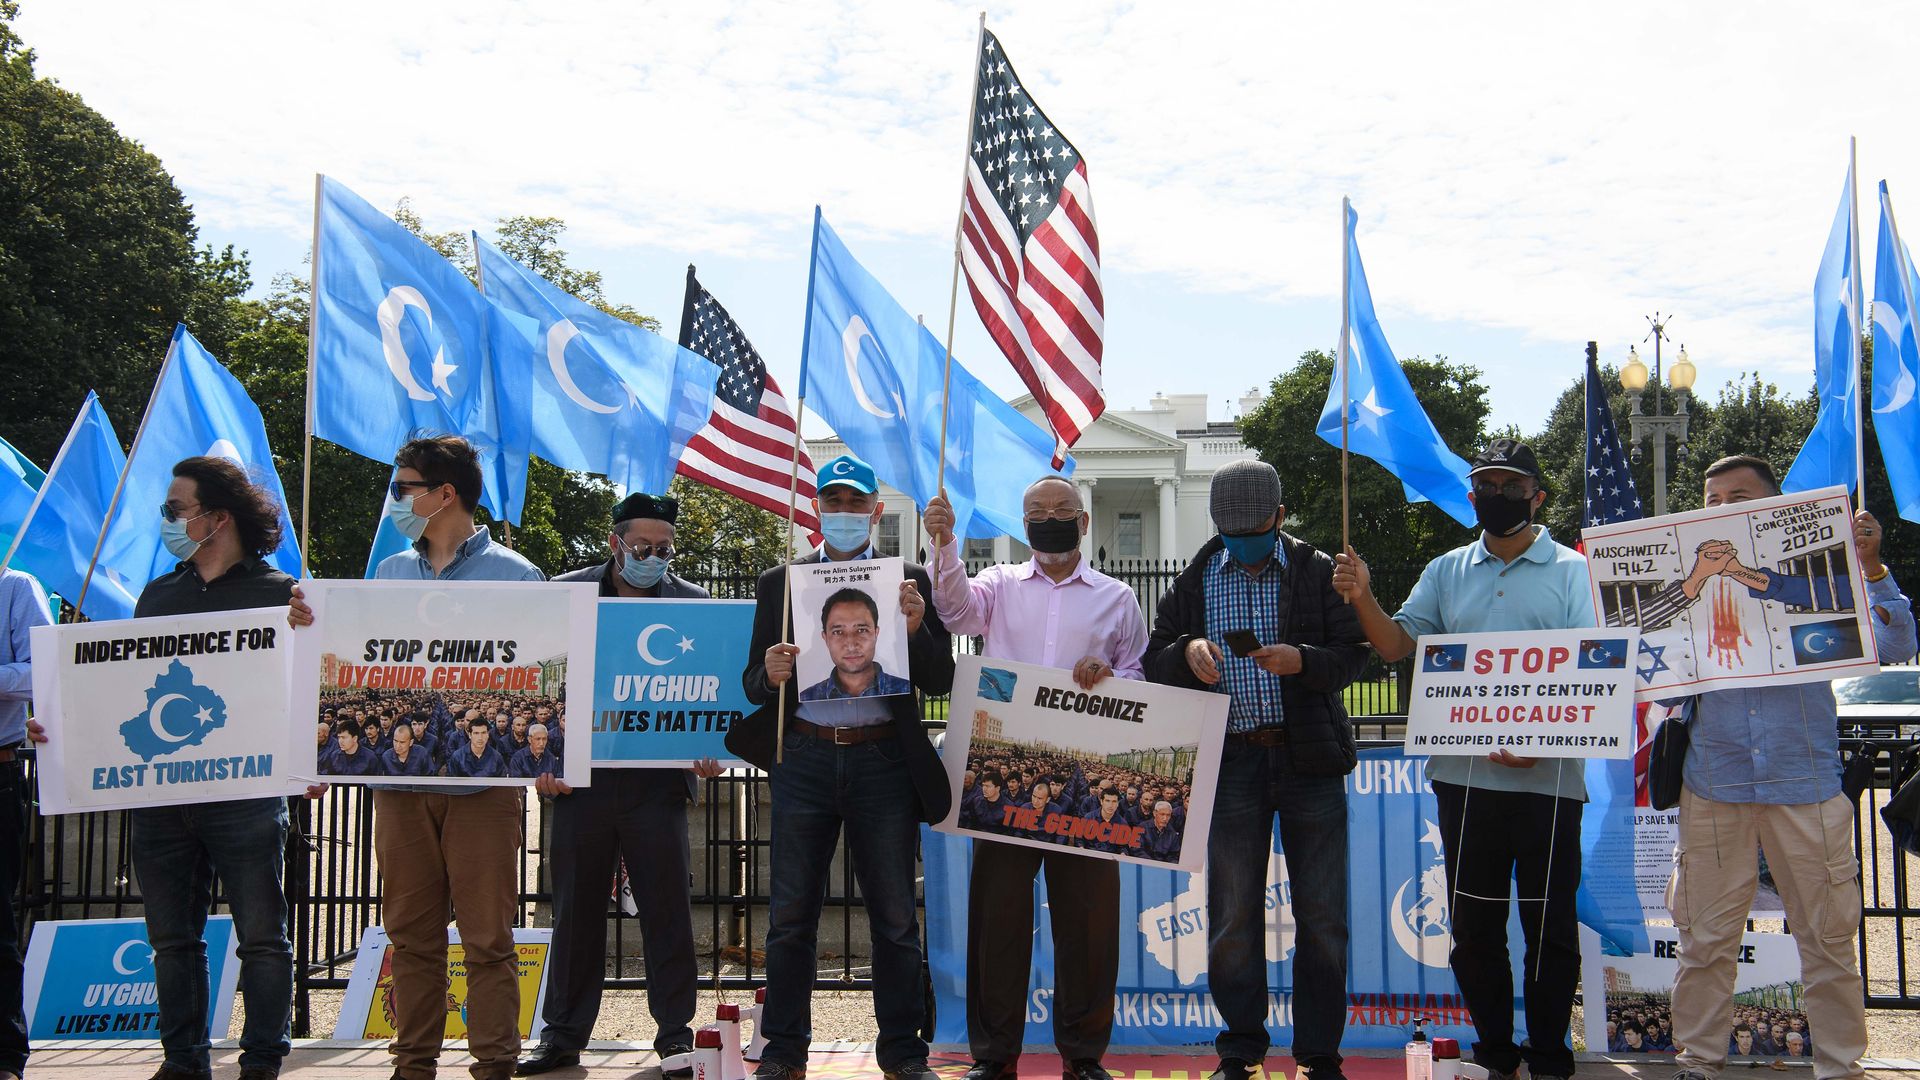 Pro-Uyghur protesters are seen highlighting their cause outside the White House.